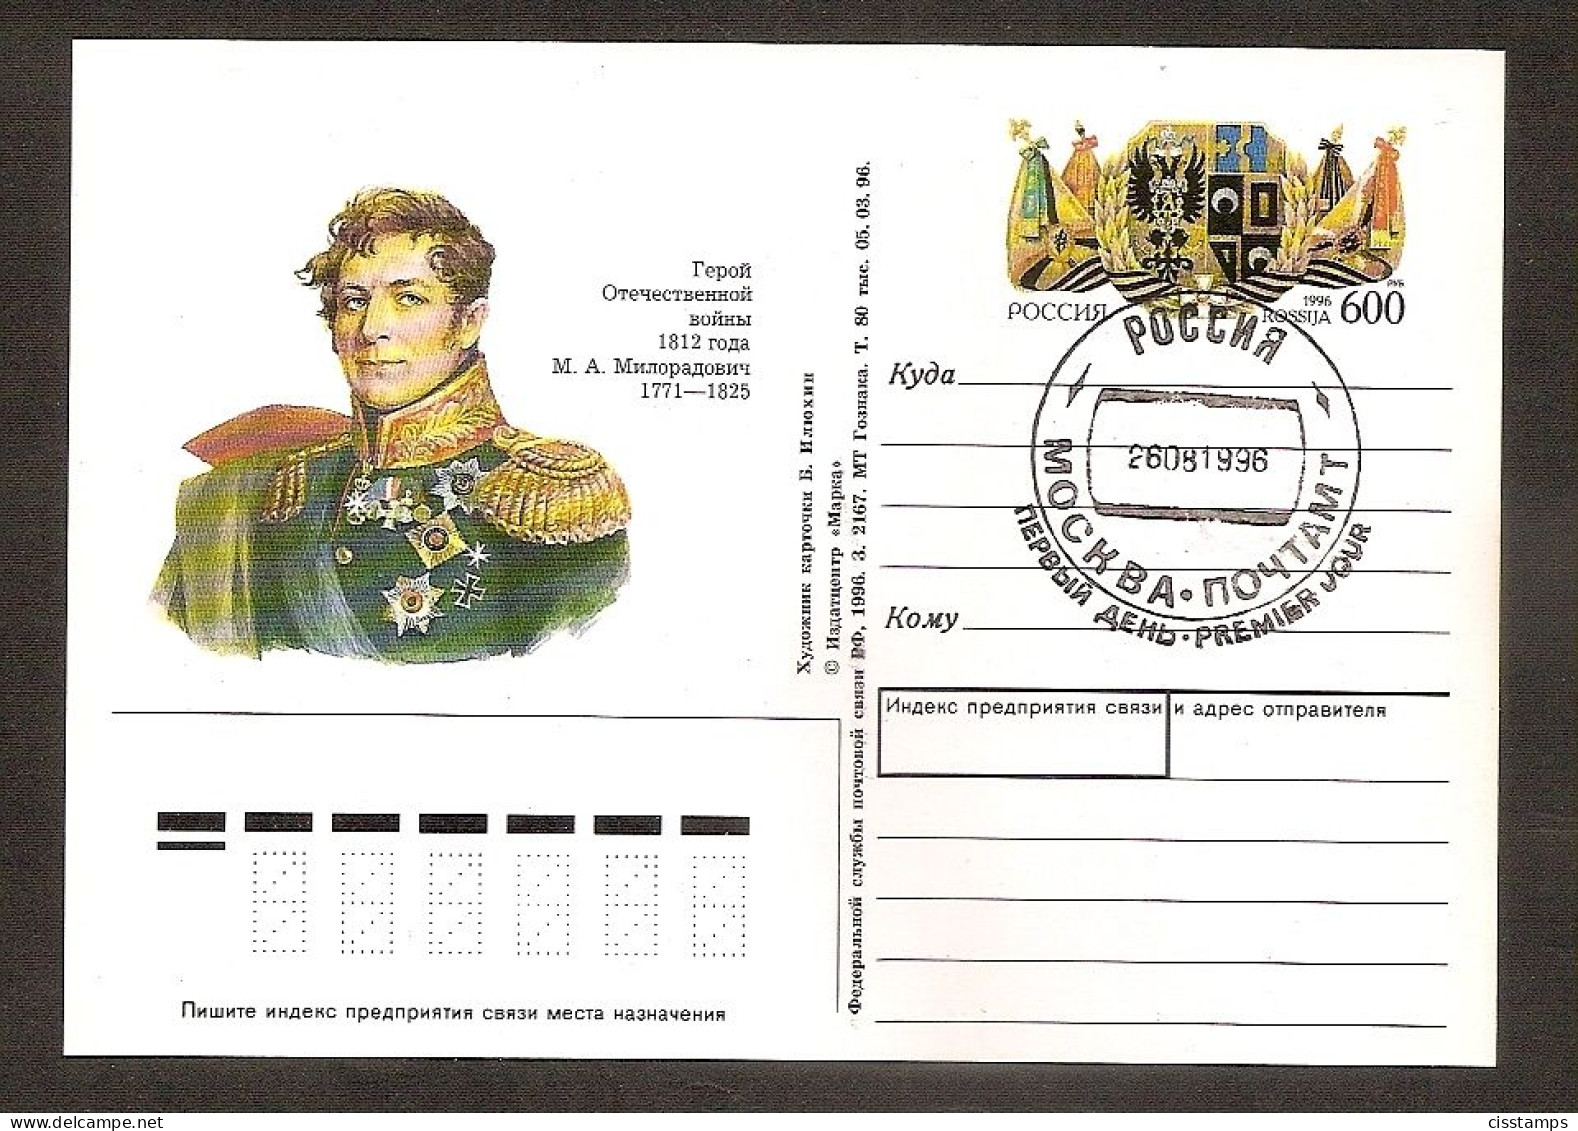 Russia 1996●Hero Of The 1812 War M.Miloradovich●Symbols Of Russia●stamped Stationery●postal Card●FDC Mi PSo50 - Entiers Postaux